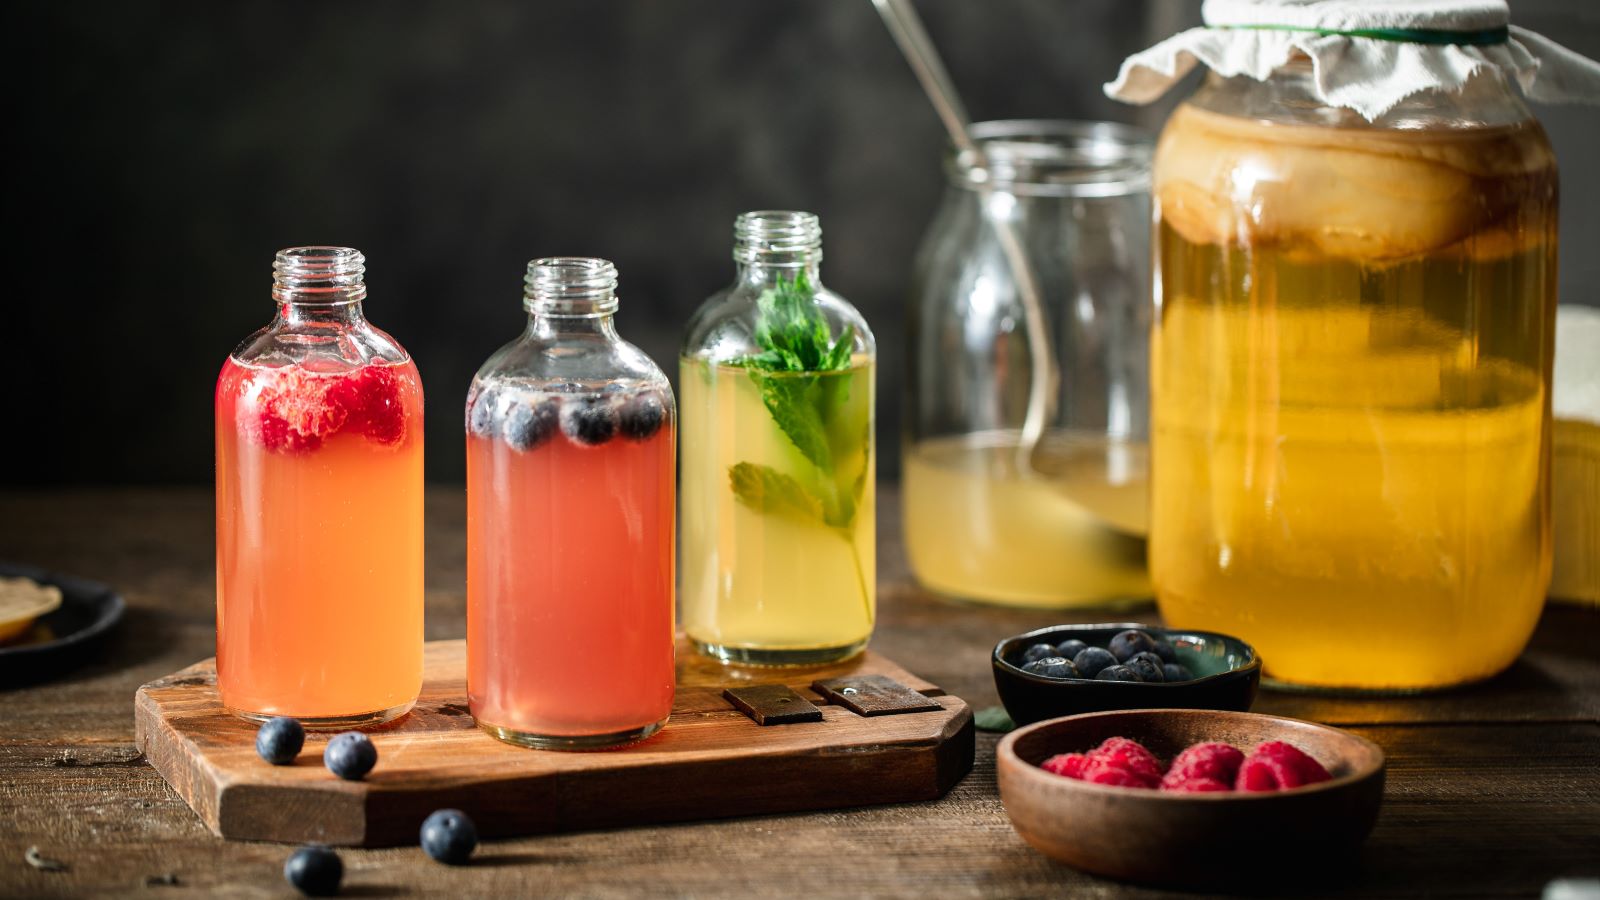 Kombucha - which is fermented sweetened tea - is said to help with digestion, rid the body of toxins and boost energy.